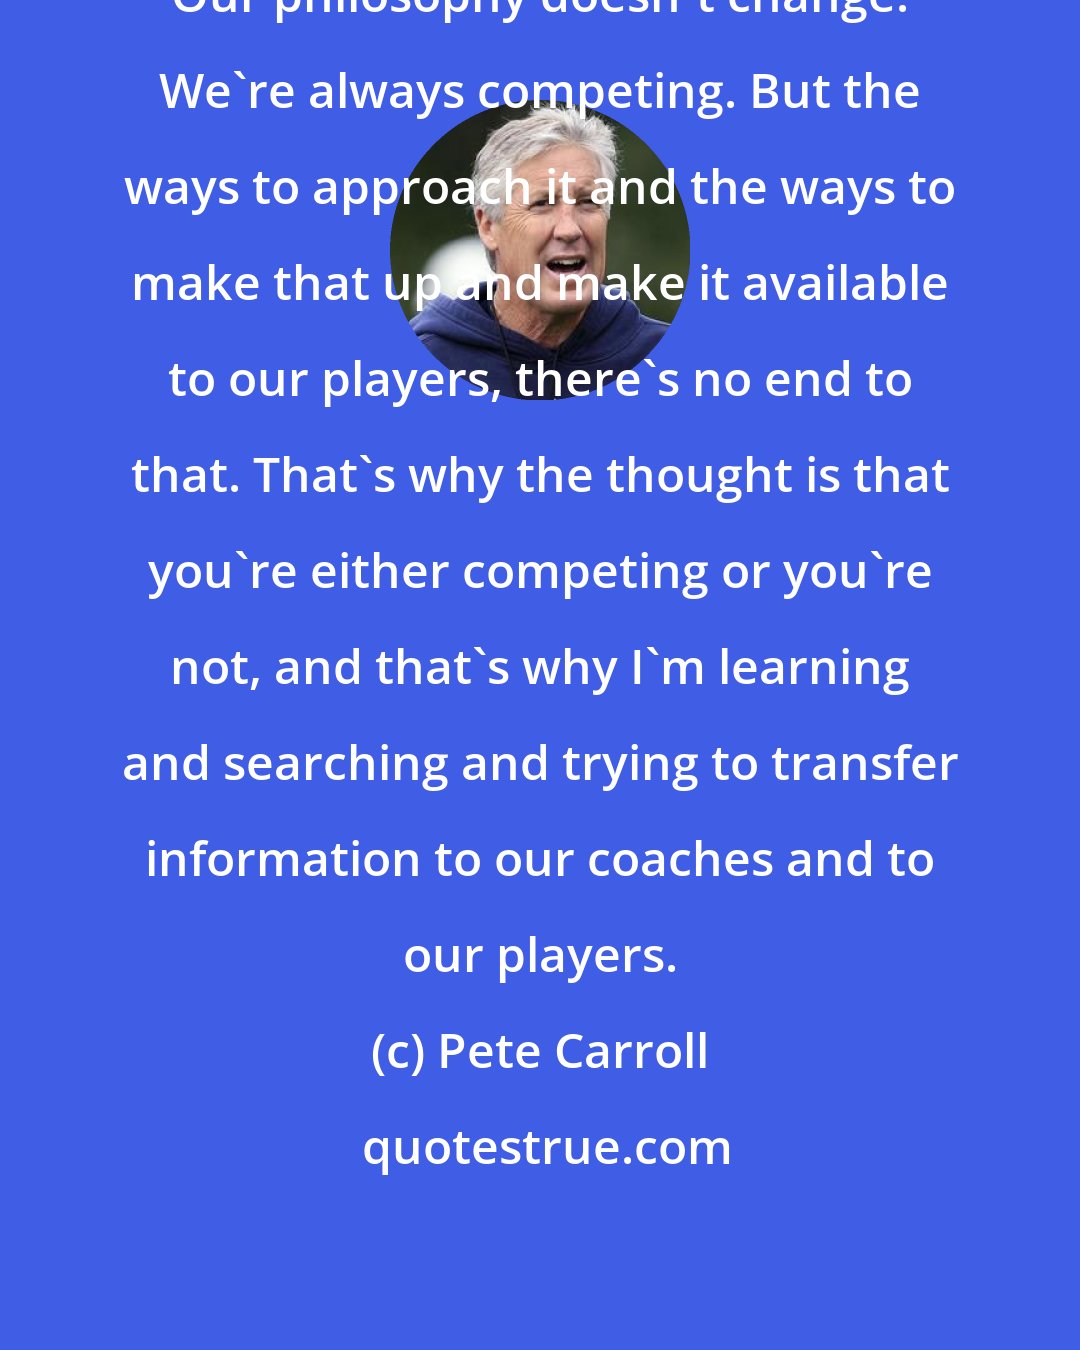 Pete Carroll: Our philosophy doesn't change. We're always competing. But the ways to approach it and the ways to make that up and make it available to our players, there's no end to that. That's why the thought is that you're either competing or you're not, and that's why I'm learning and searching and trying to transfer information to our coaches and to our players.